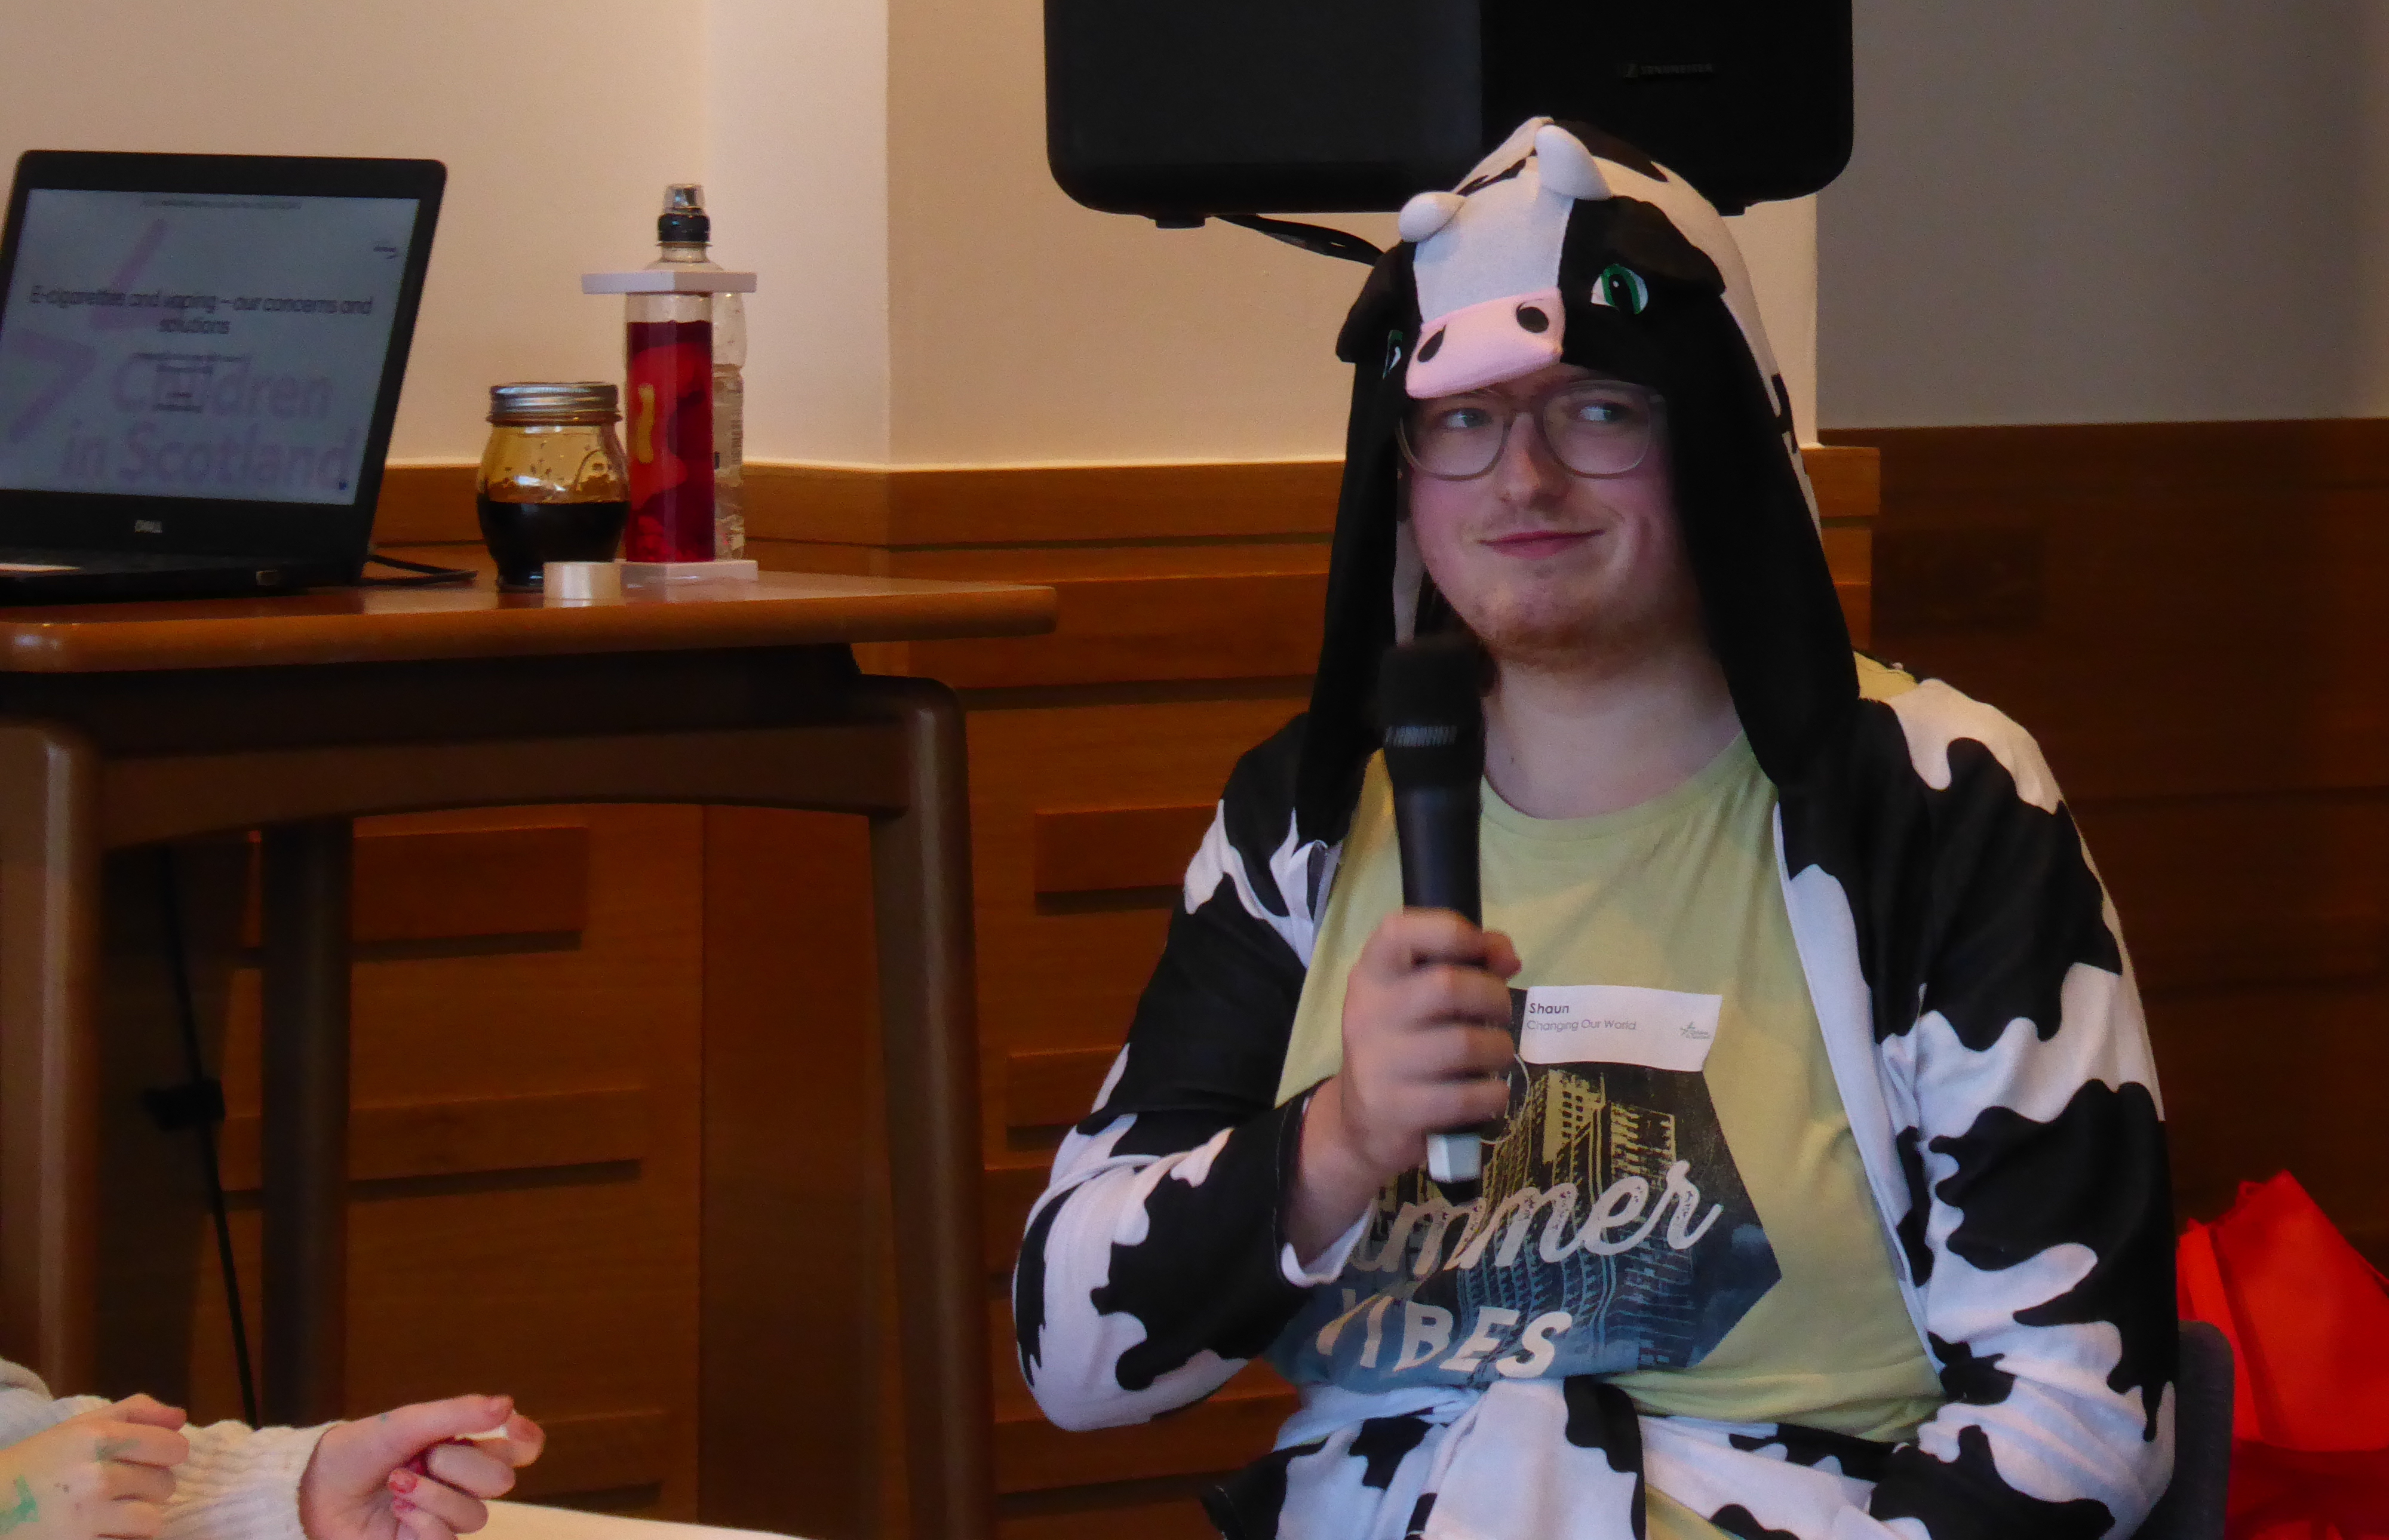 A young person wearing a cow costume, holding a microphone.